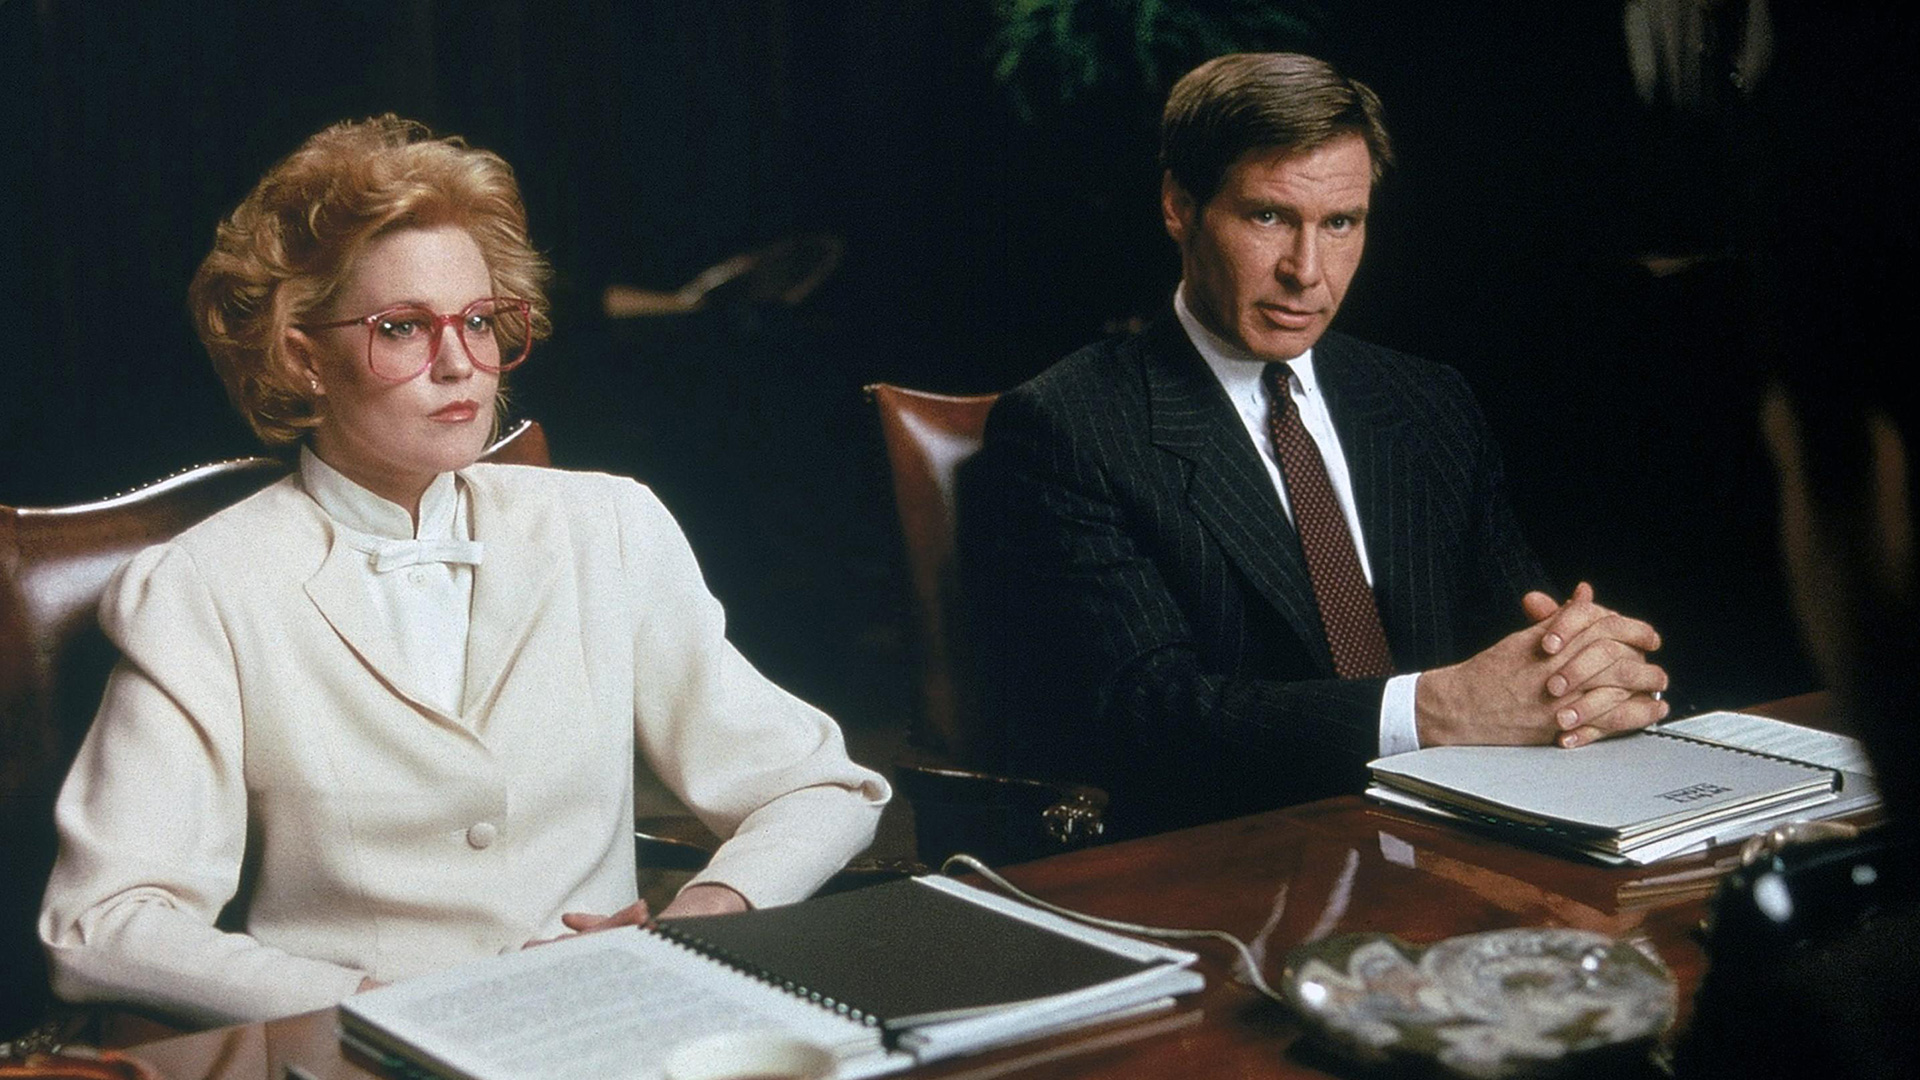 December 20, 1988: “Working Girl” Premiered and Encouraged Women to Demand a Seat in the Boardroom